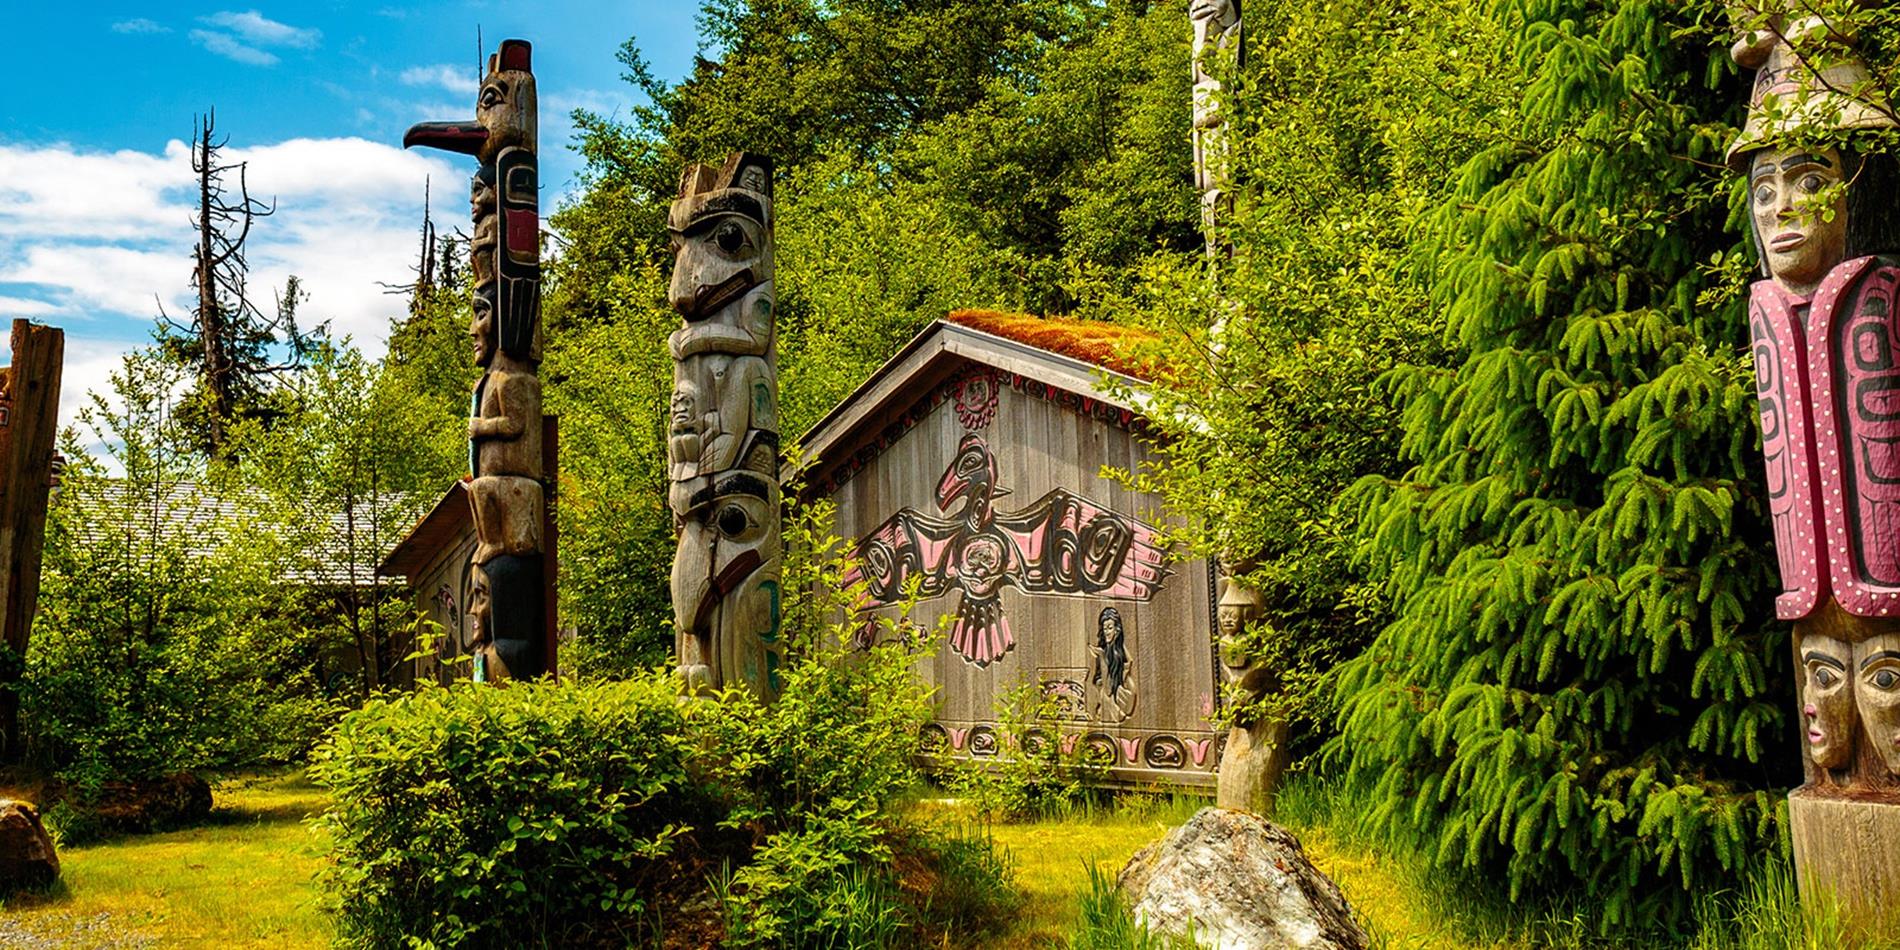 Wooden hand carved totem poles set amongst the trees and timber clad house